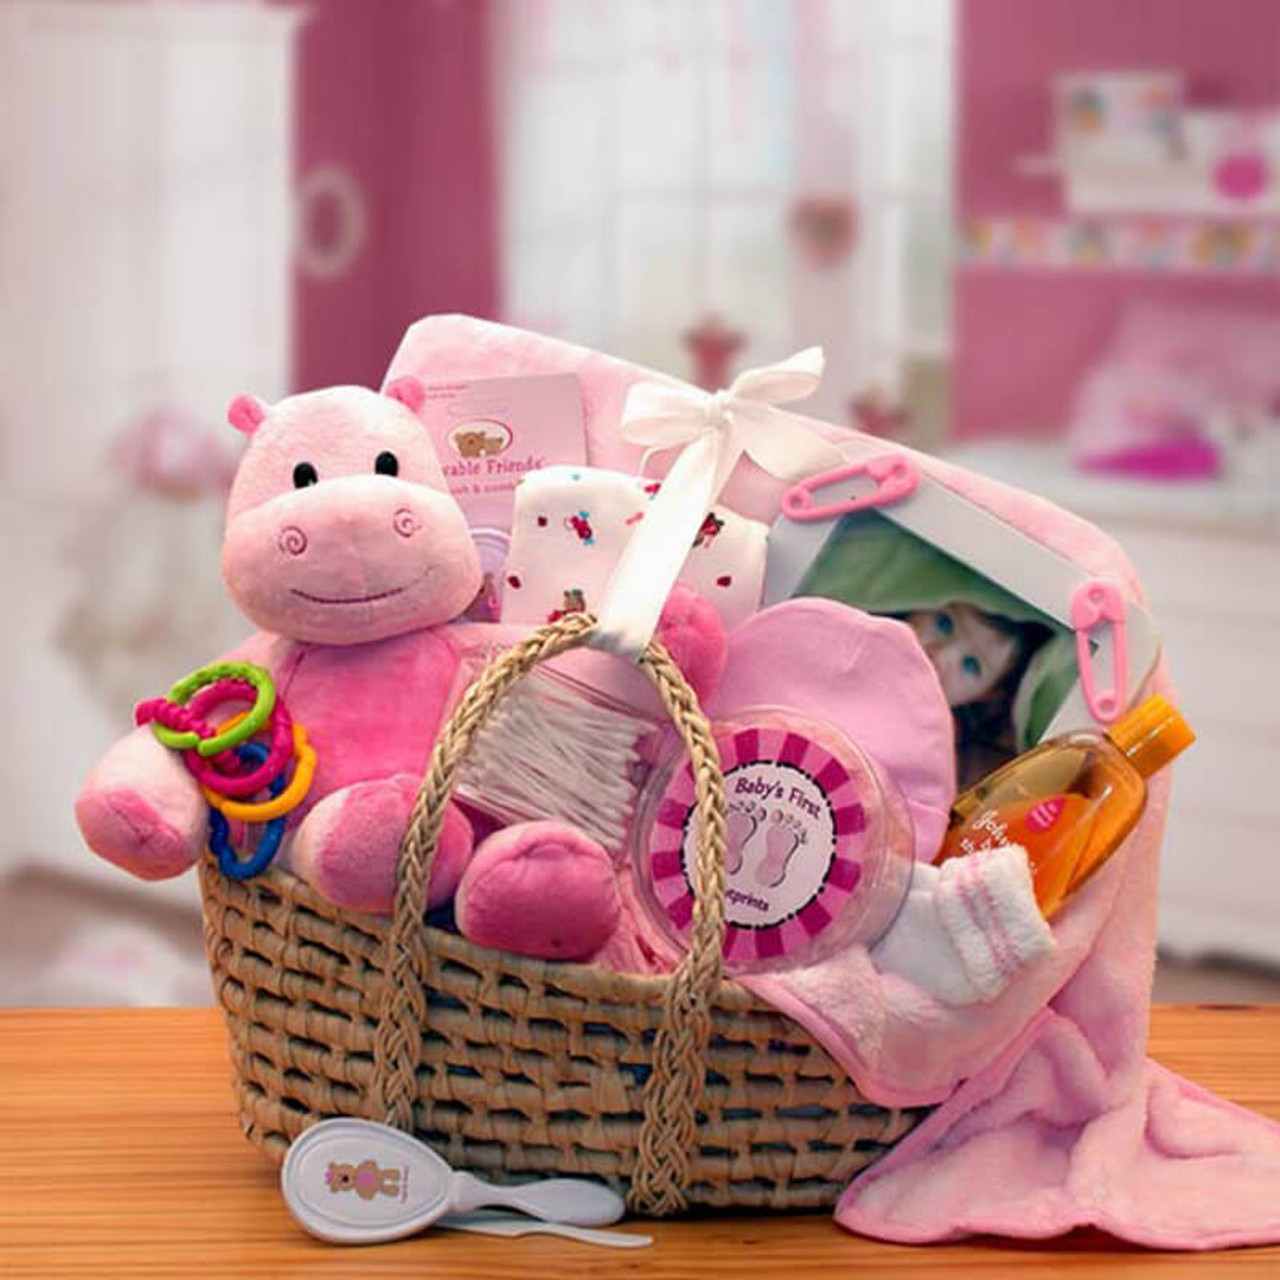  Baby Box Shop Baskets for Girls - 17 Newborn Baby Essentials  Gift Set for Baby Girl - New Baby Gift Basket, Welcome Baby Girl Gift  Basket, New Baby Girl Gift